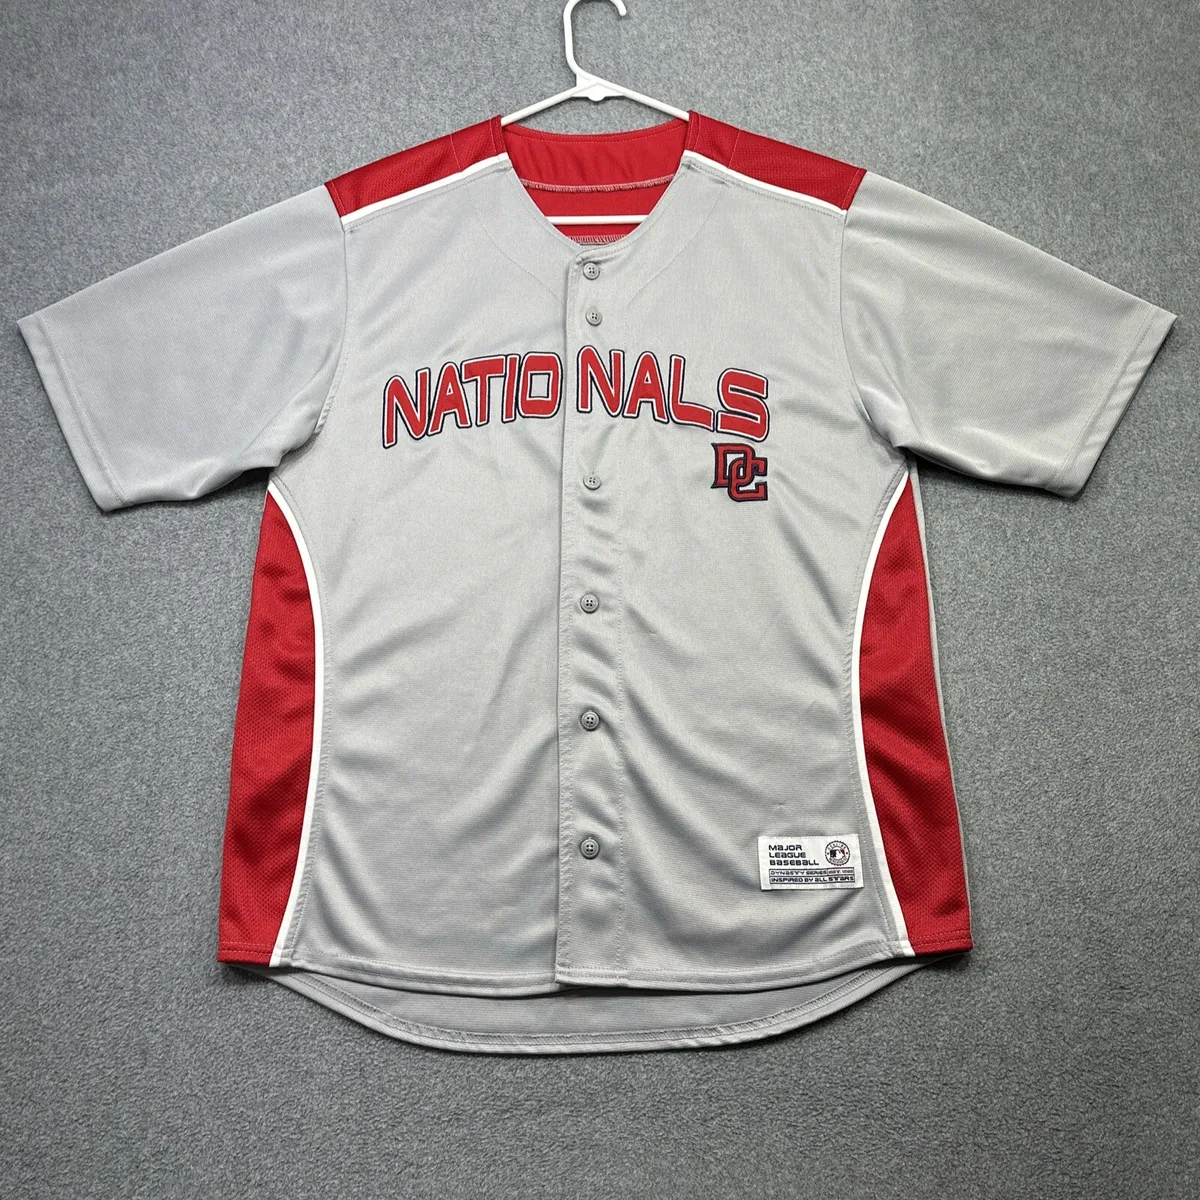 gray nationals jersey